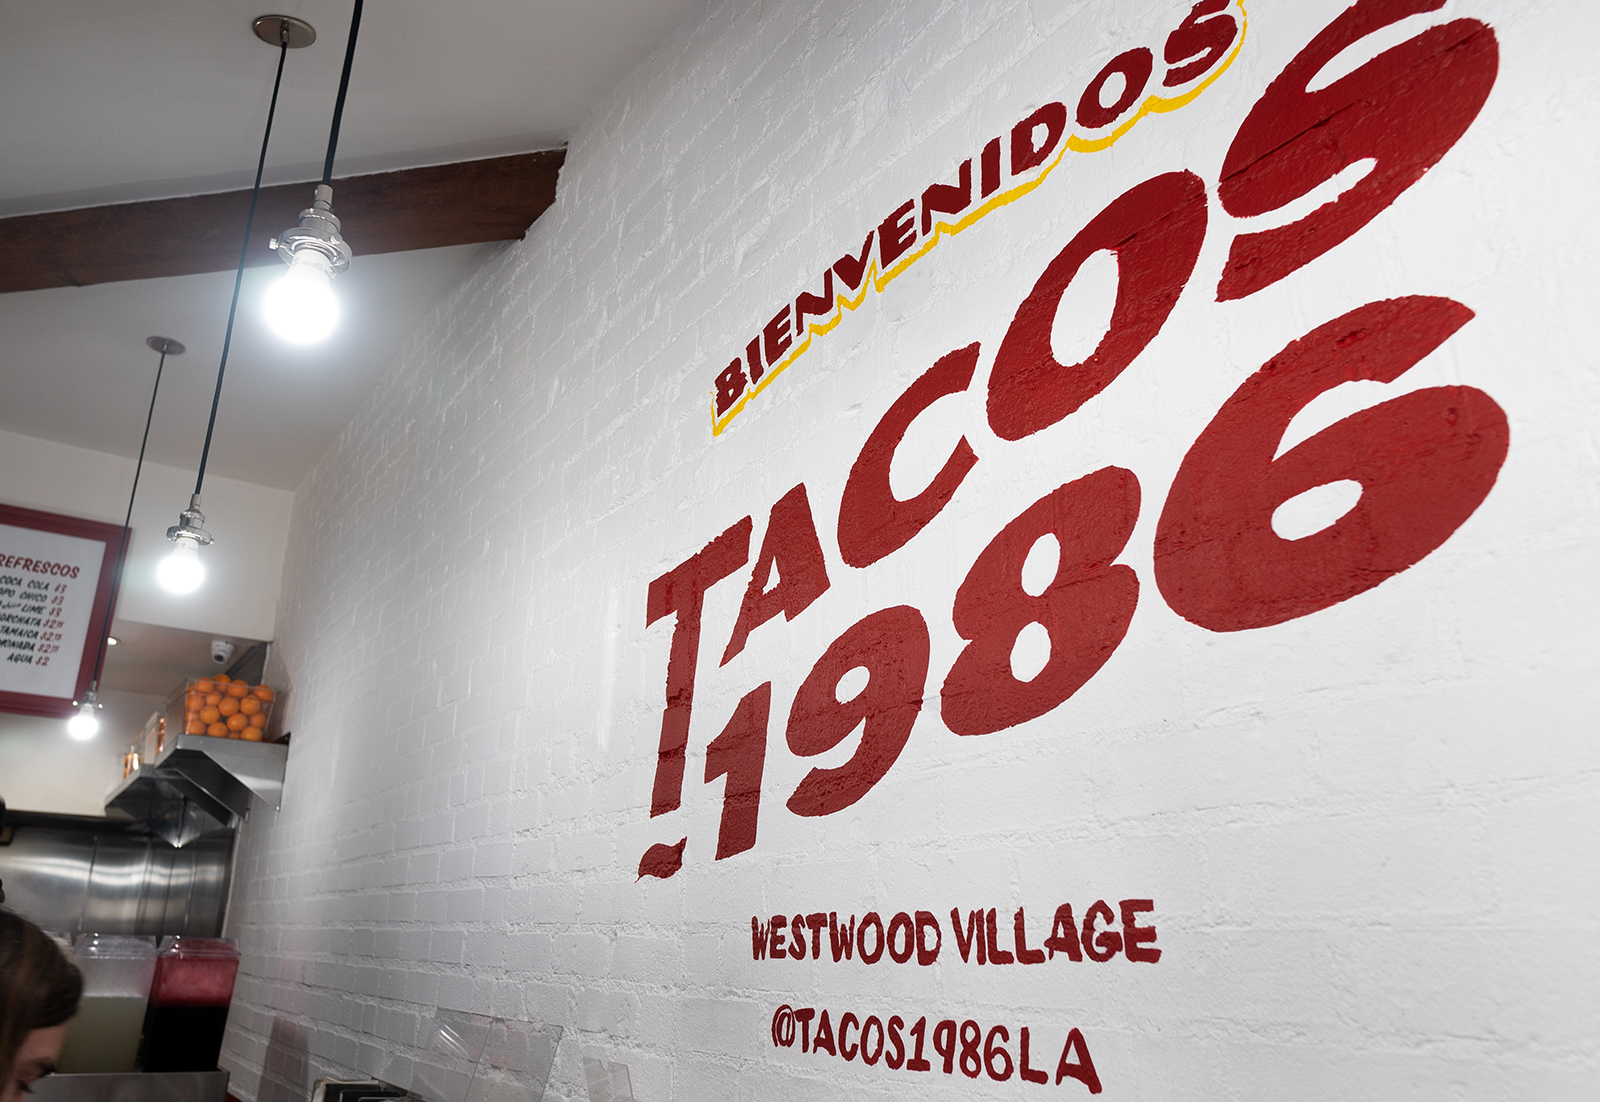 Restaurant review: Tacos 1986 spices up Westwood food scene with vibrant, authentic Mexican flavors